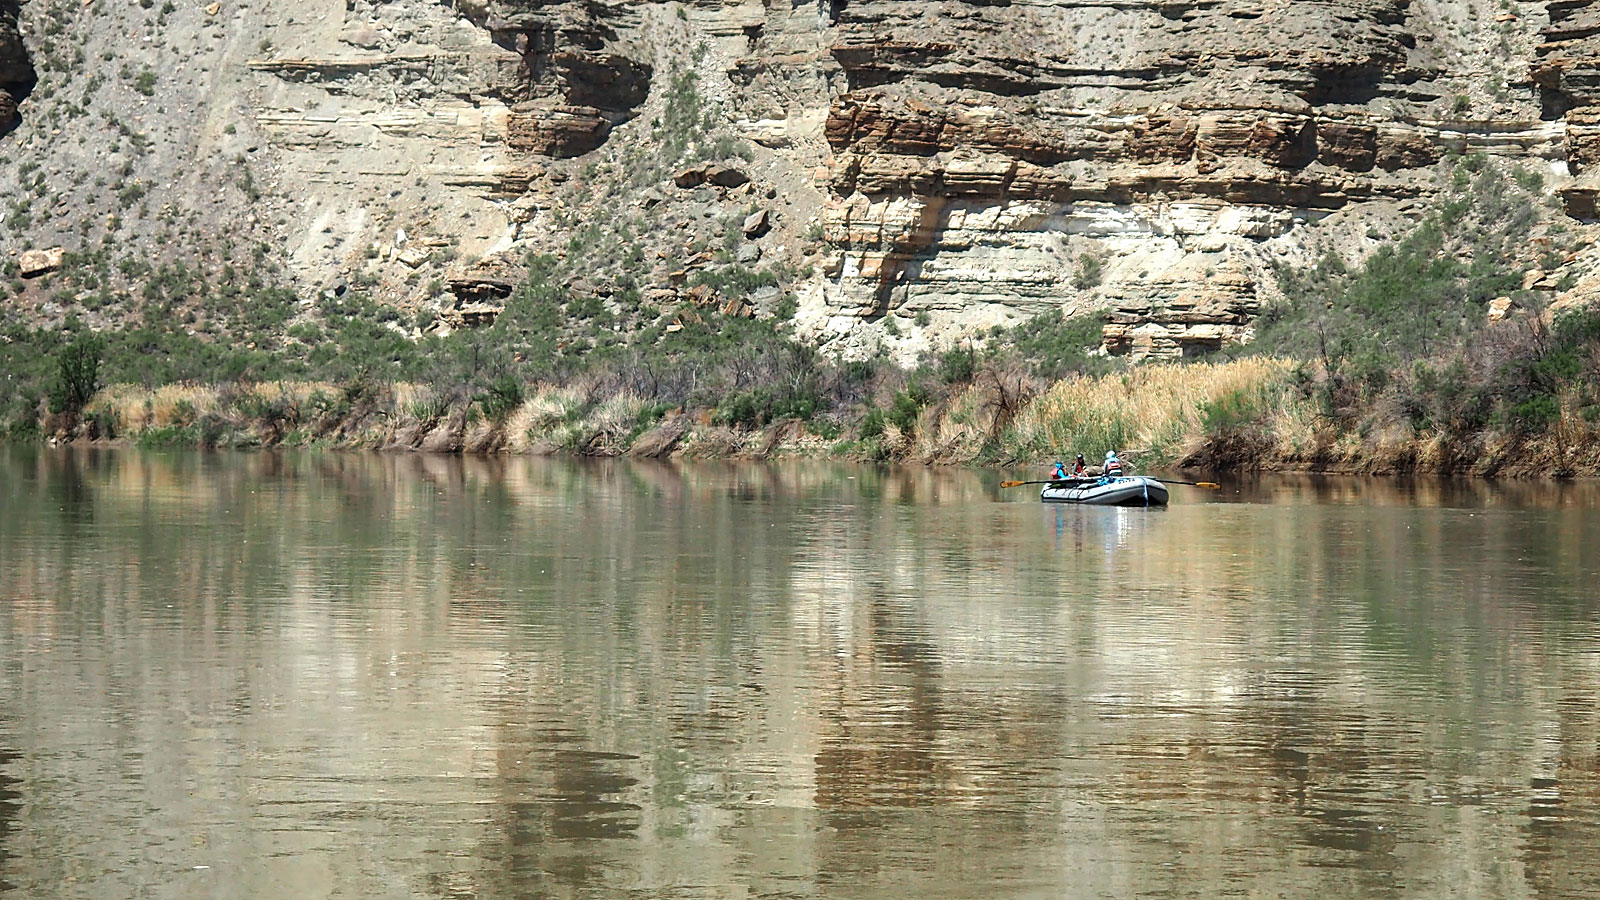 Rafts floating on the Green River in Desolation Canyon in Utah during a whitewater rafting trip with ARTA River Trips